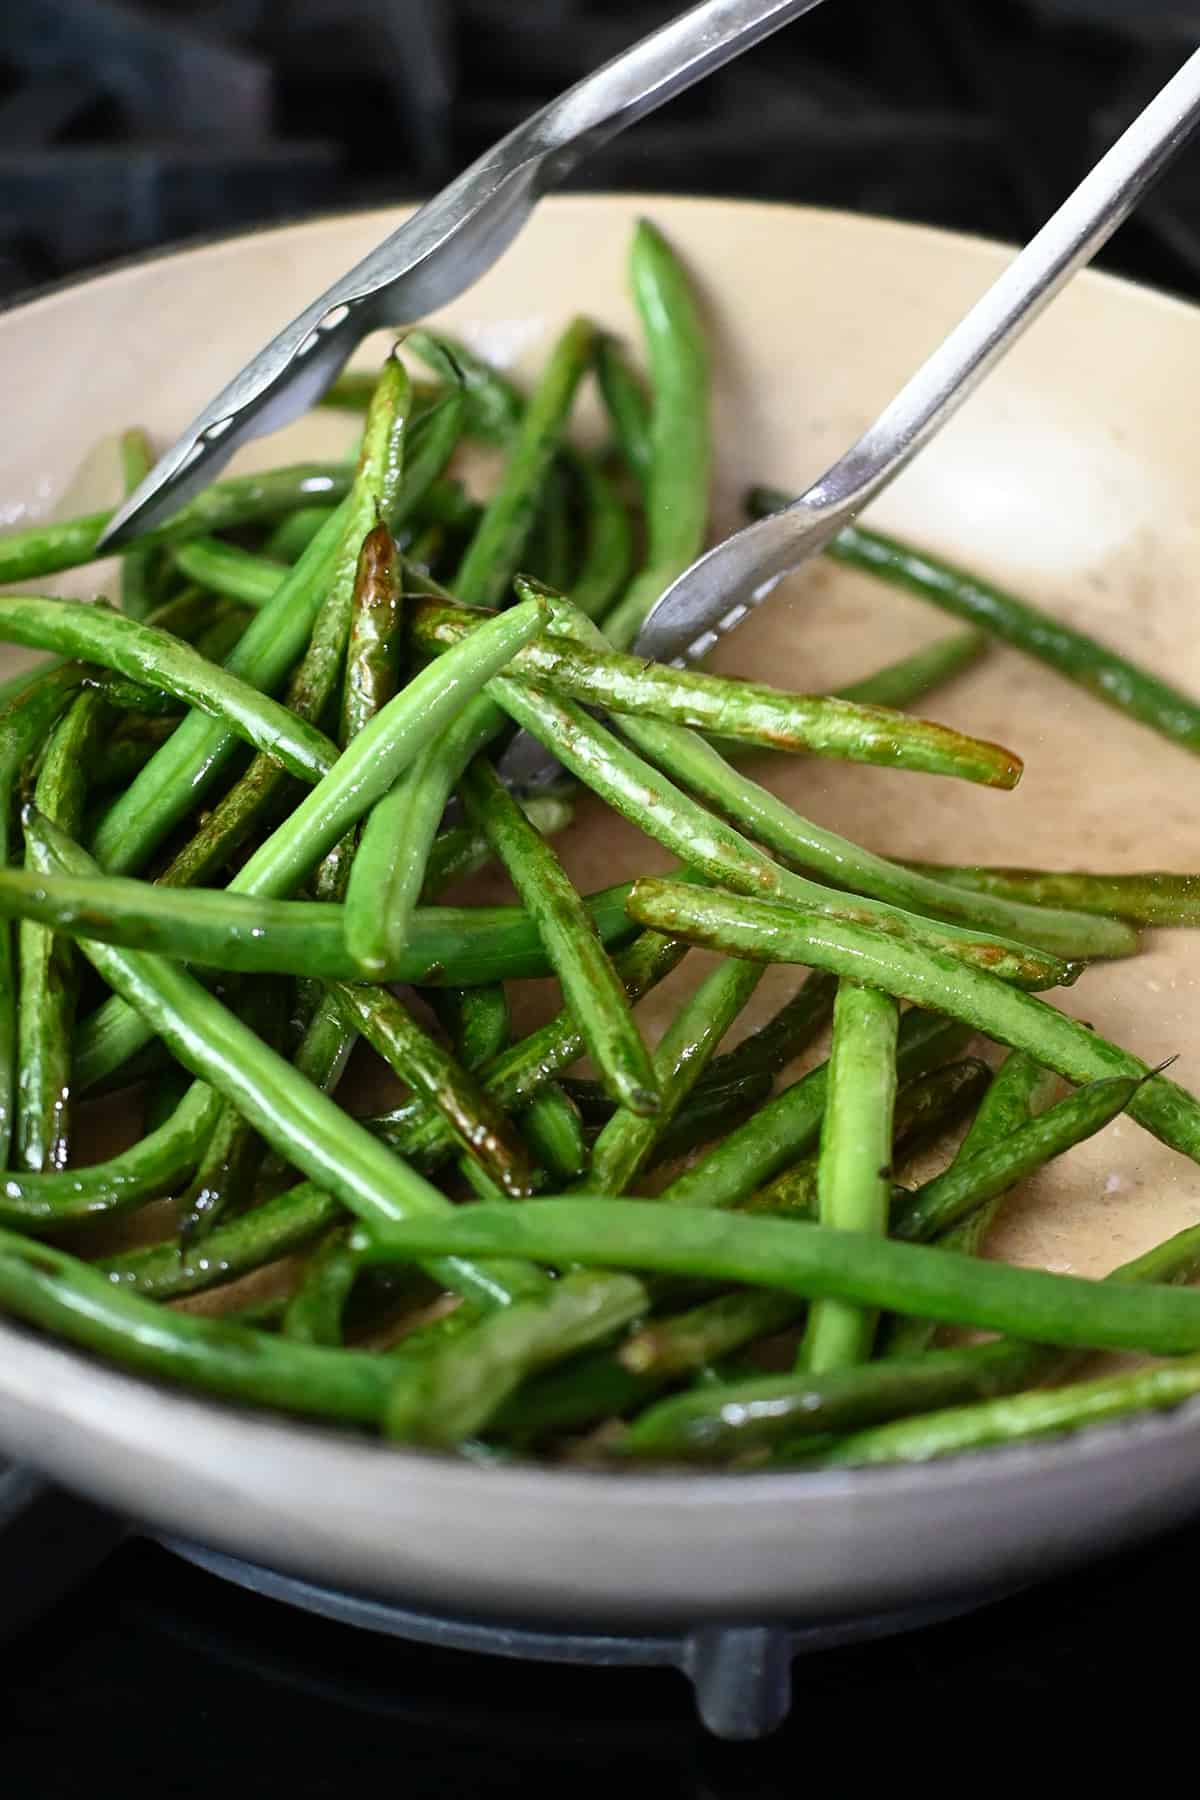 A close-up of the blistered stir-fried green beans in an enameled cast iron skillet.